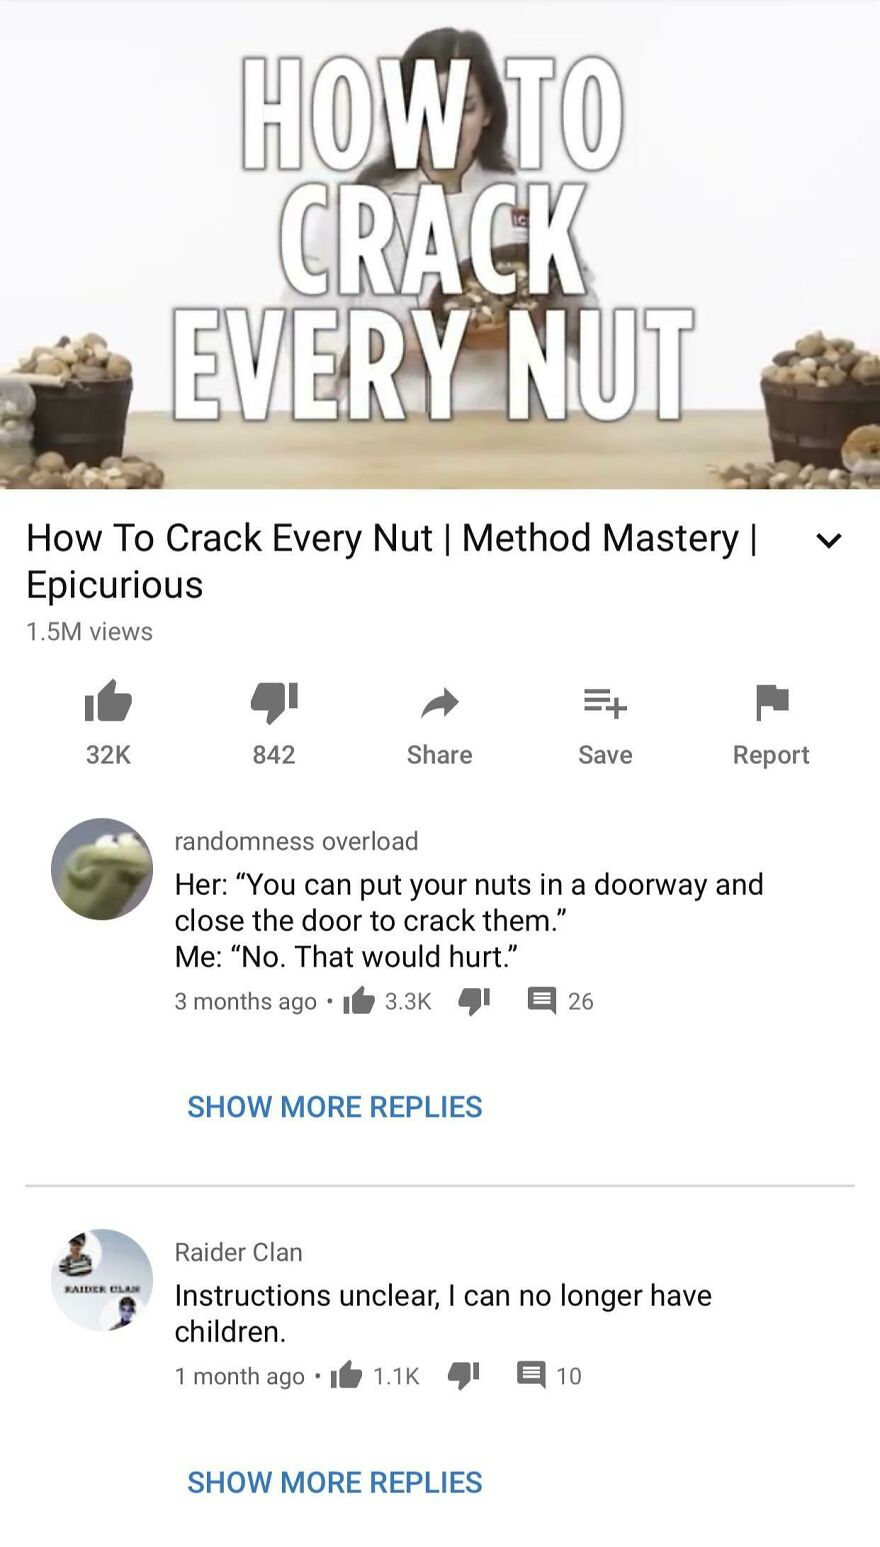 How To Crack All Nuts